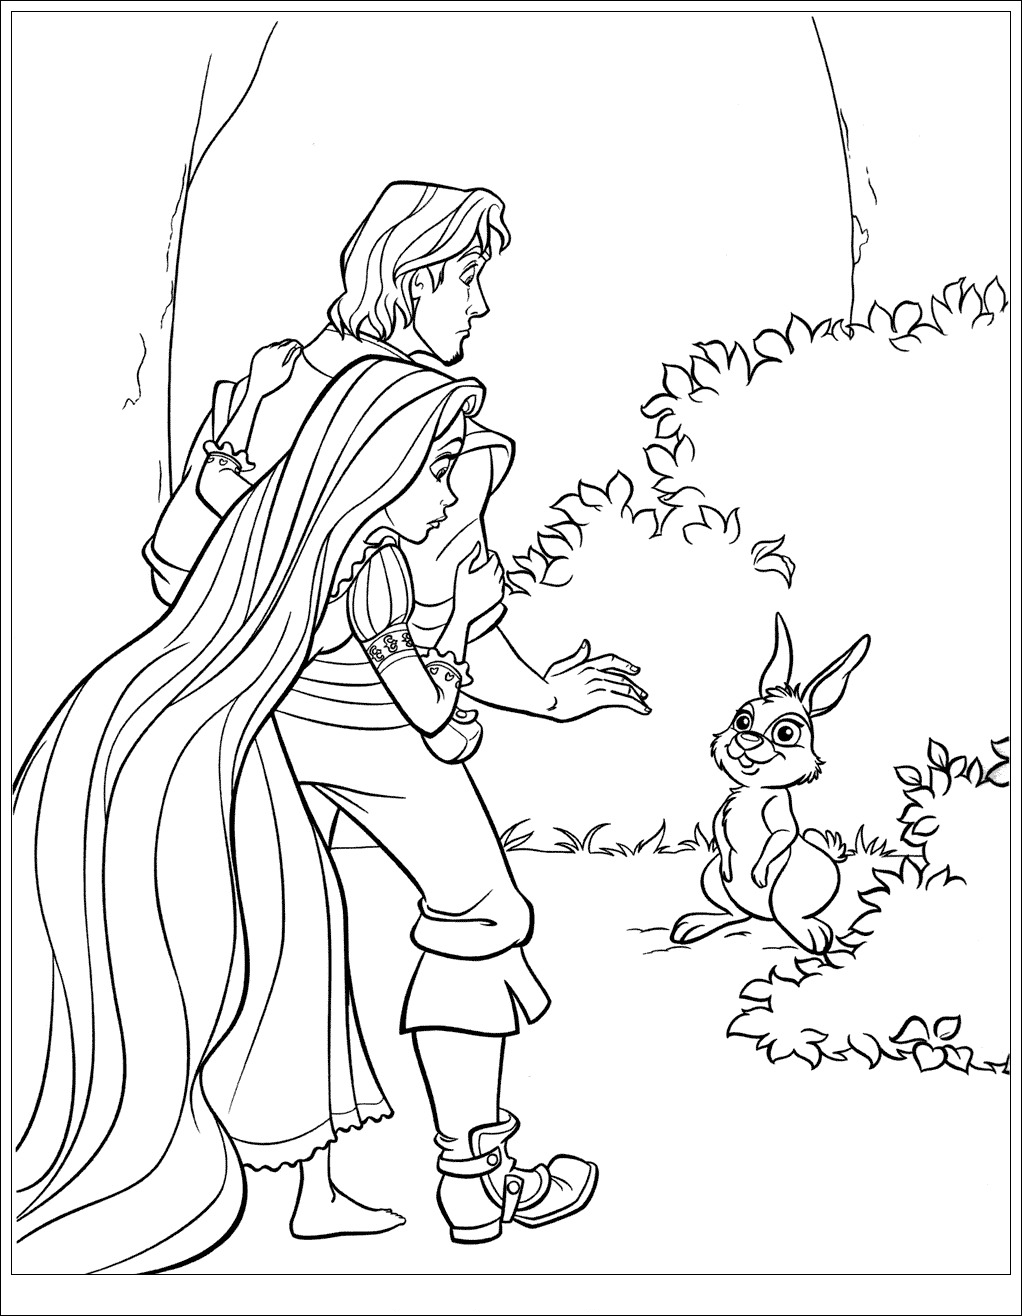 Free Tangled coloring page to print and color, for kids : Flynn Rider and a little rabbit